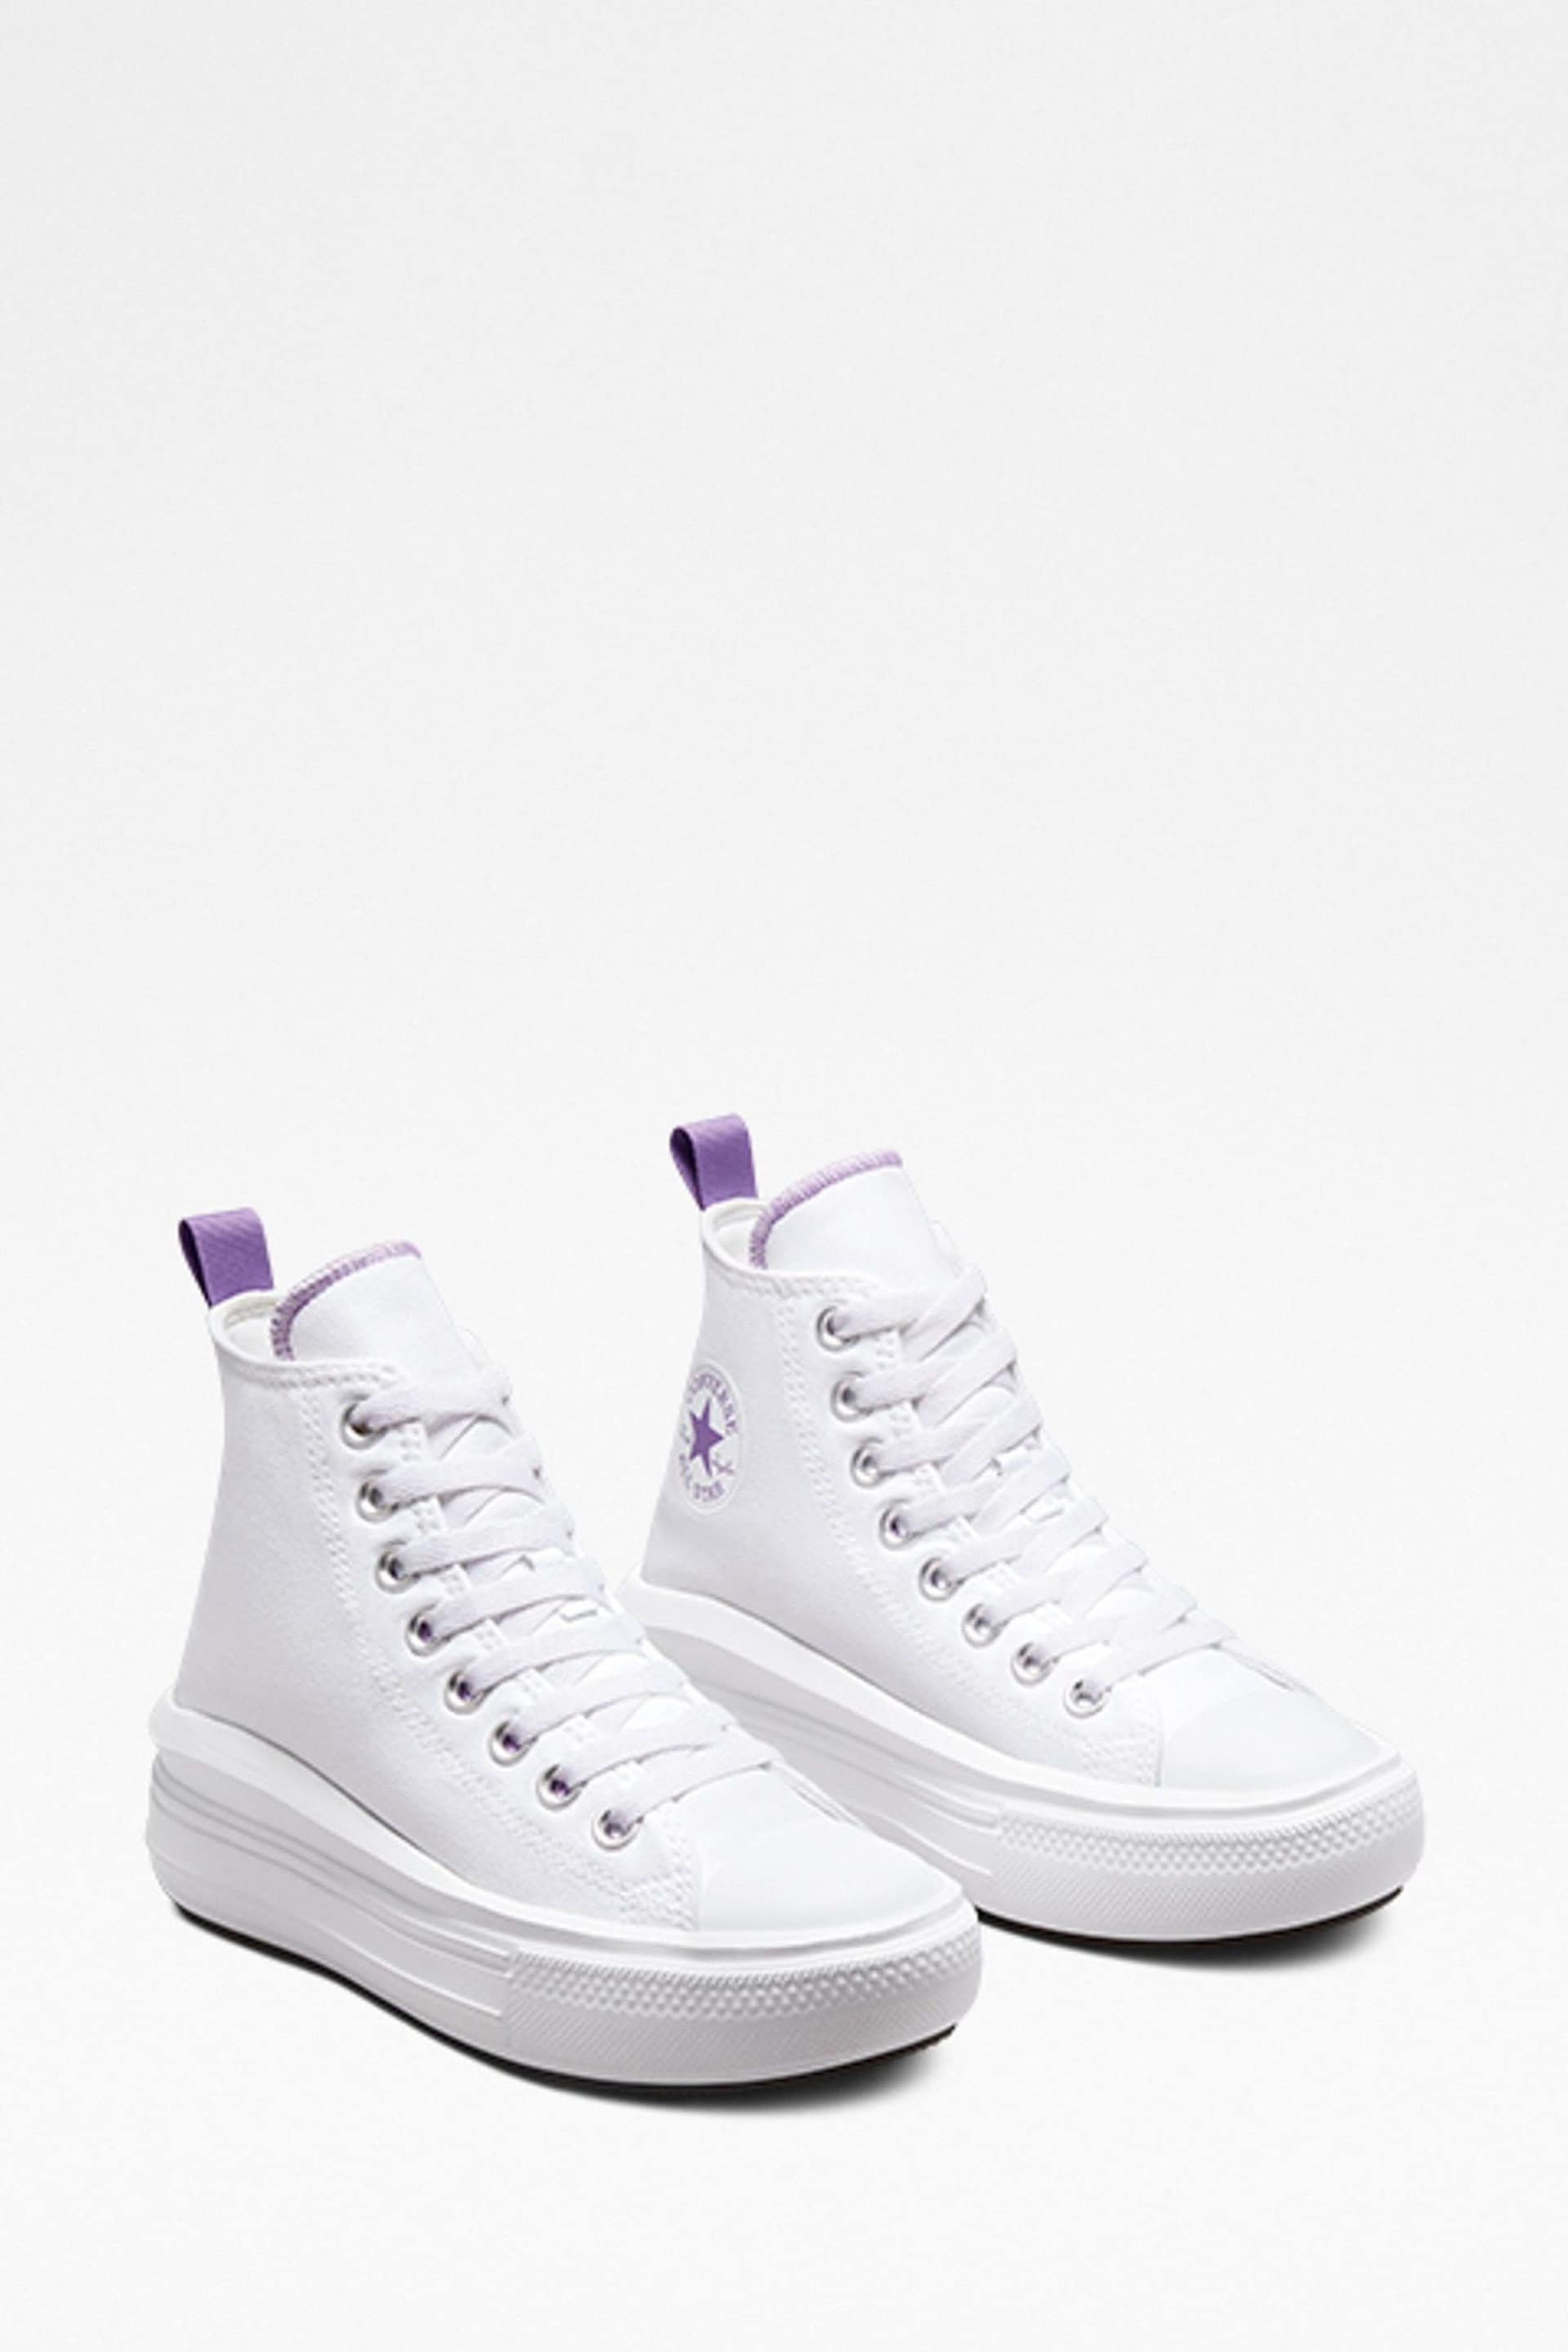 Converse White Move High Top Youth Trainers - Image 3 of 6